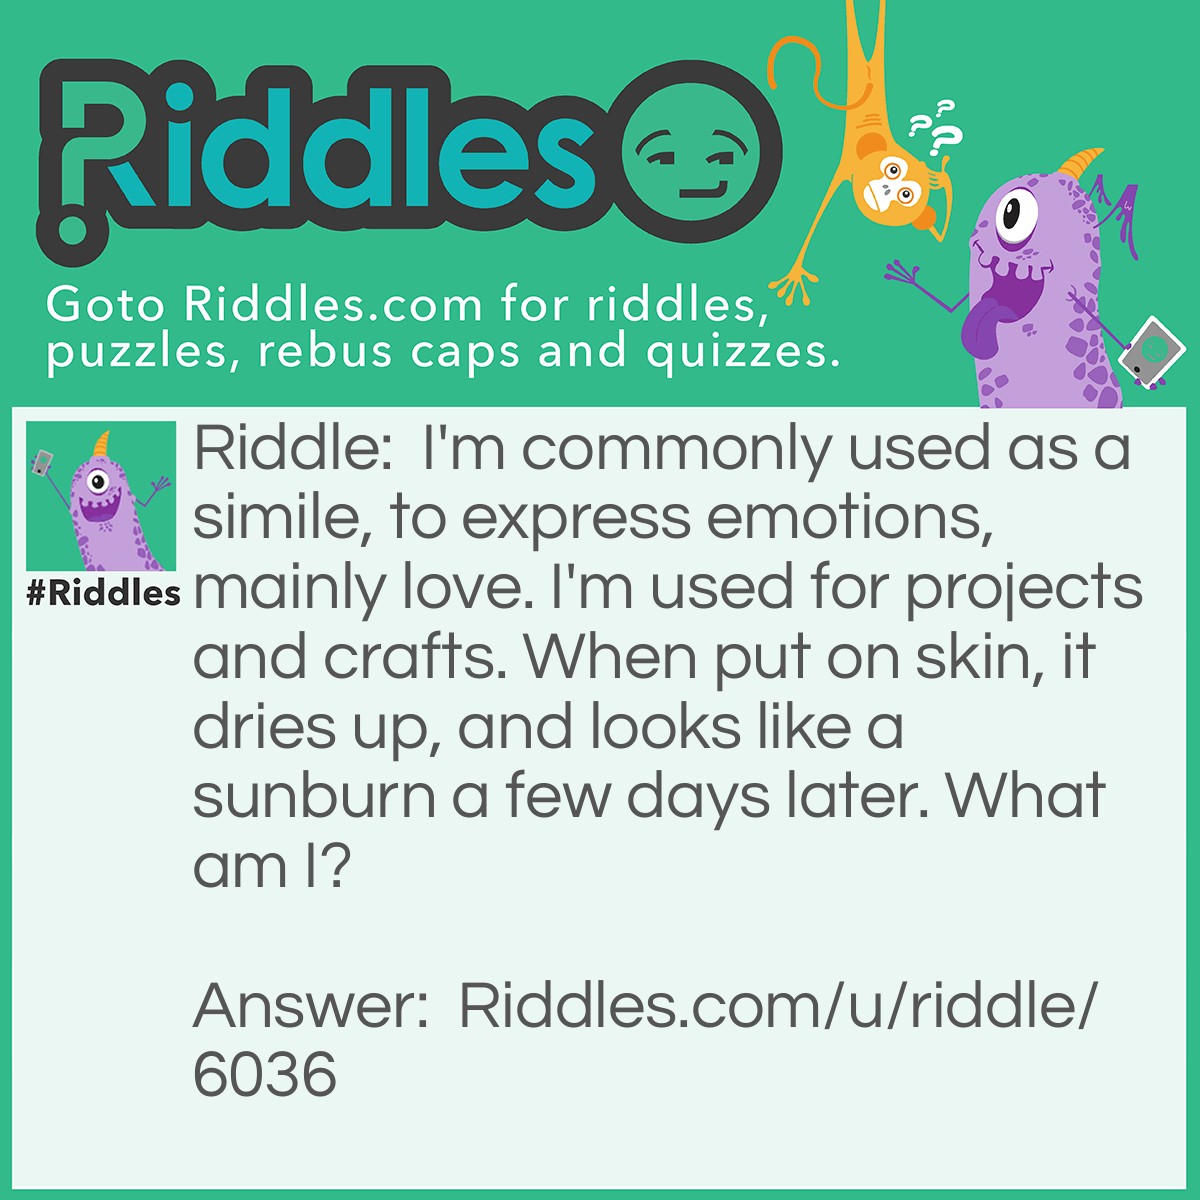 Riddle: I'm commonly used as a simile, to express emotions, mainly love. I'm used for projects and crafts. When put on skin, it dries up, and looks like a sunburn a few days later. What am I? Answer: Glue!